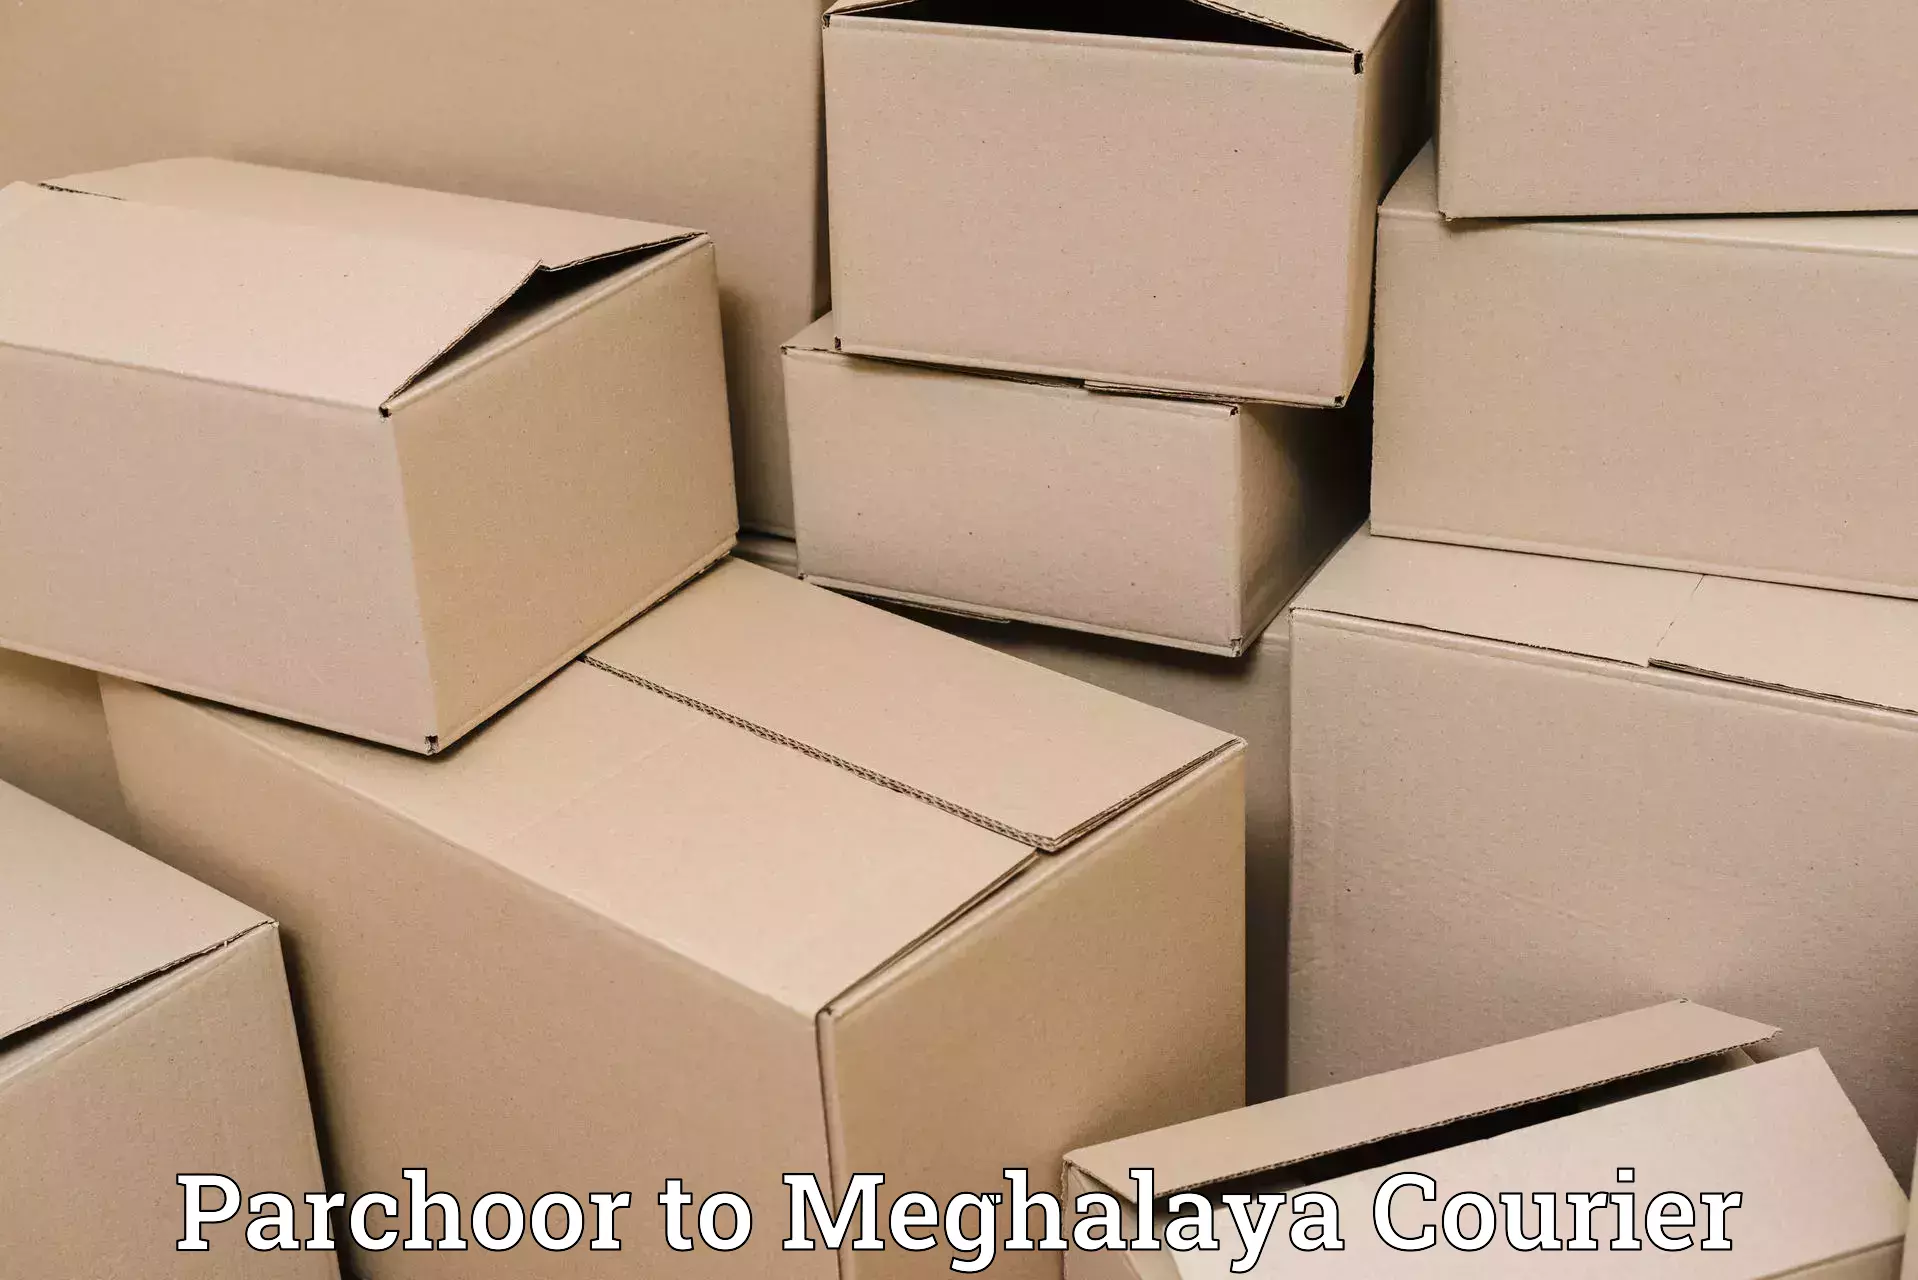 Nationwide courier service Parchoor to Meghalaya